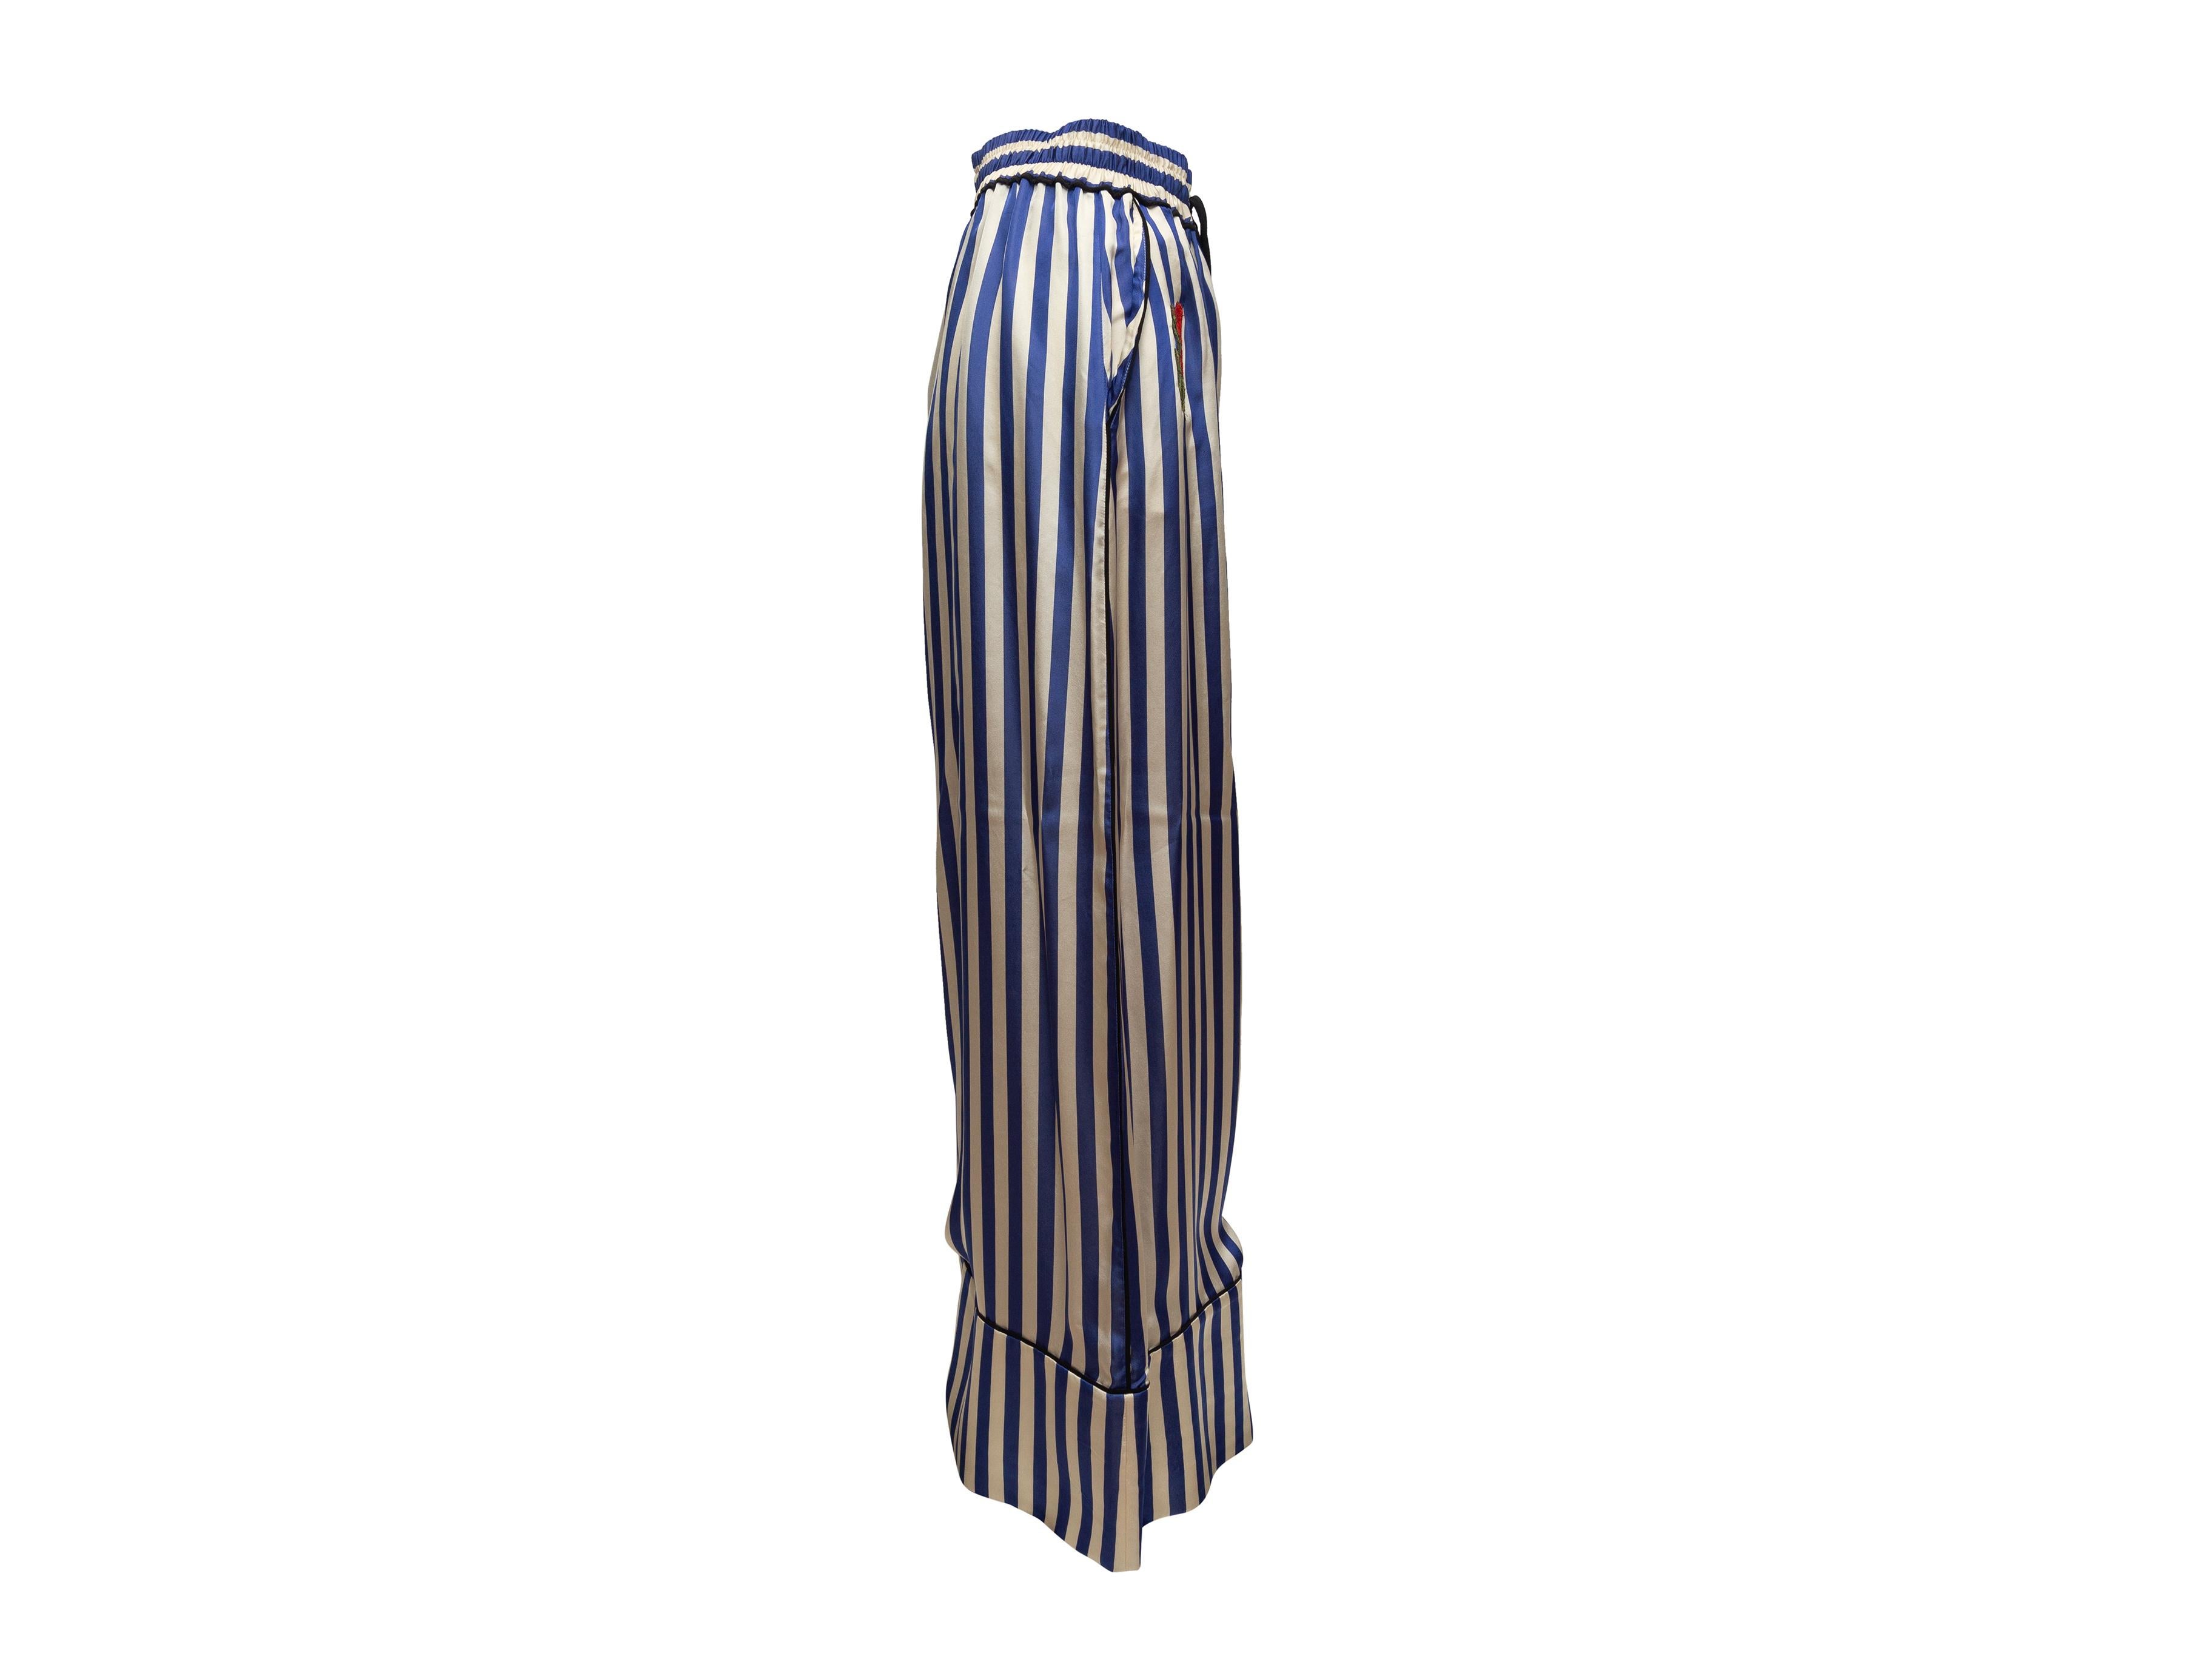 white and blue pinstripe pants